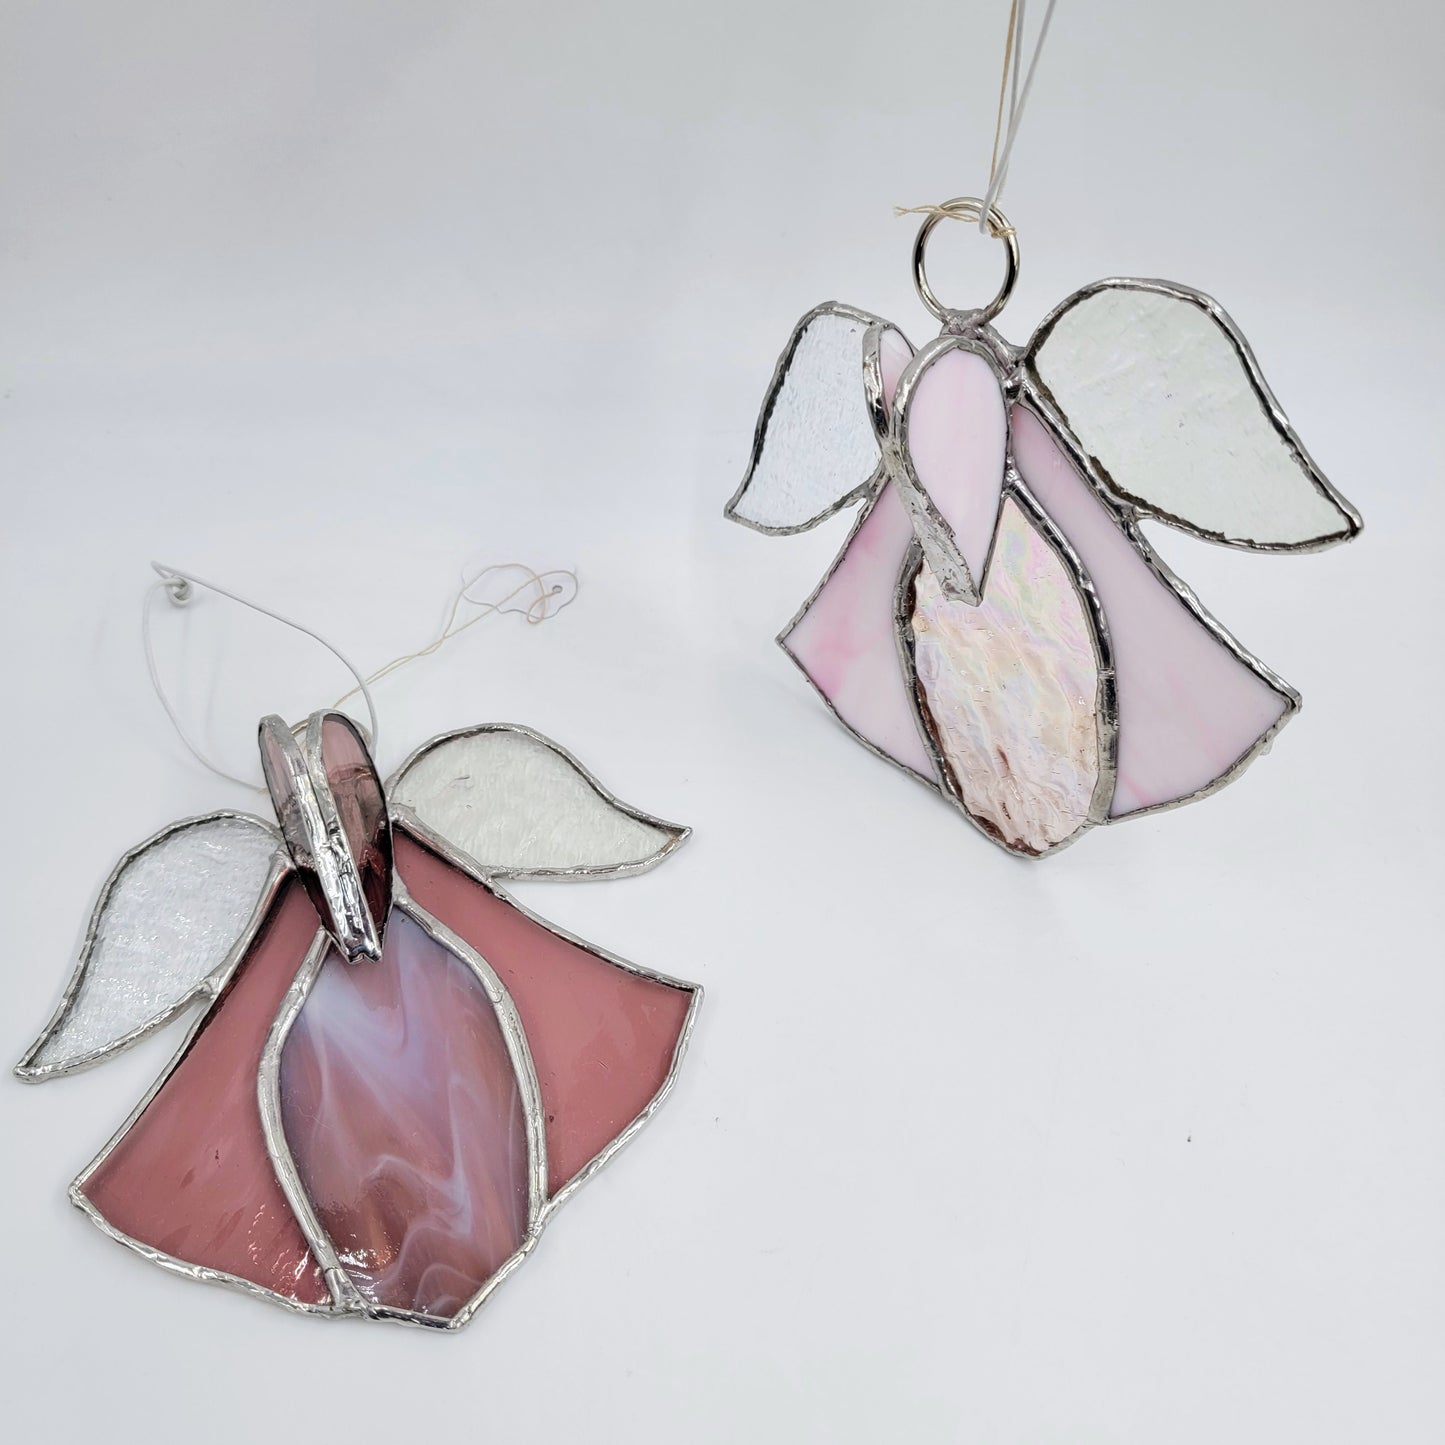 Angel With Wings Stained Glass Ornament - 3D - Suncatchers